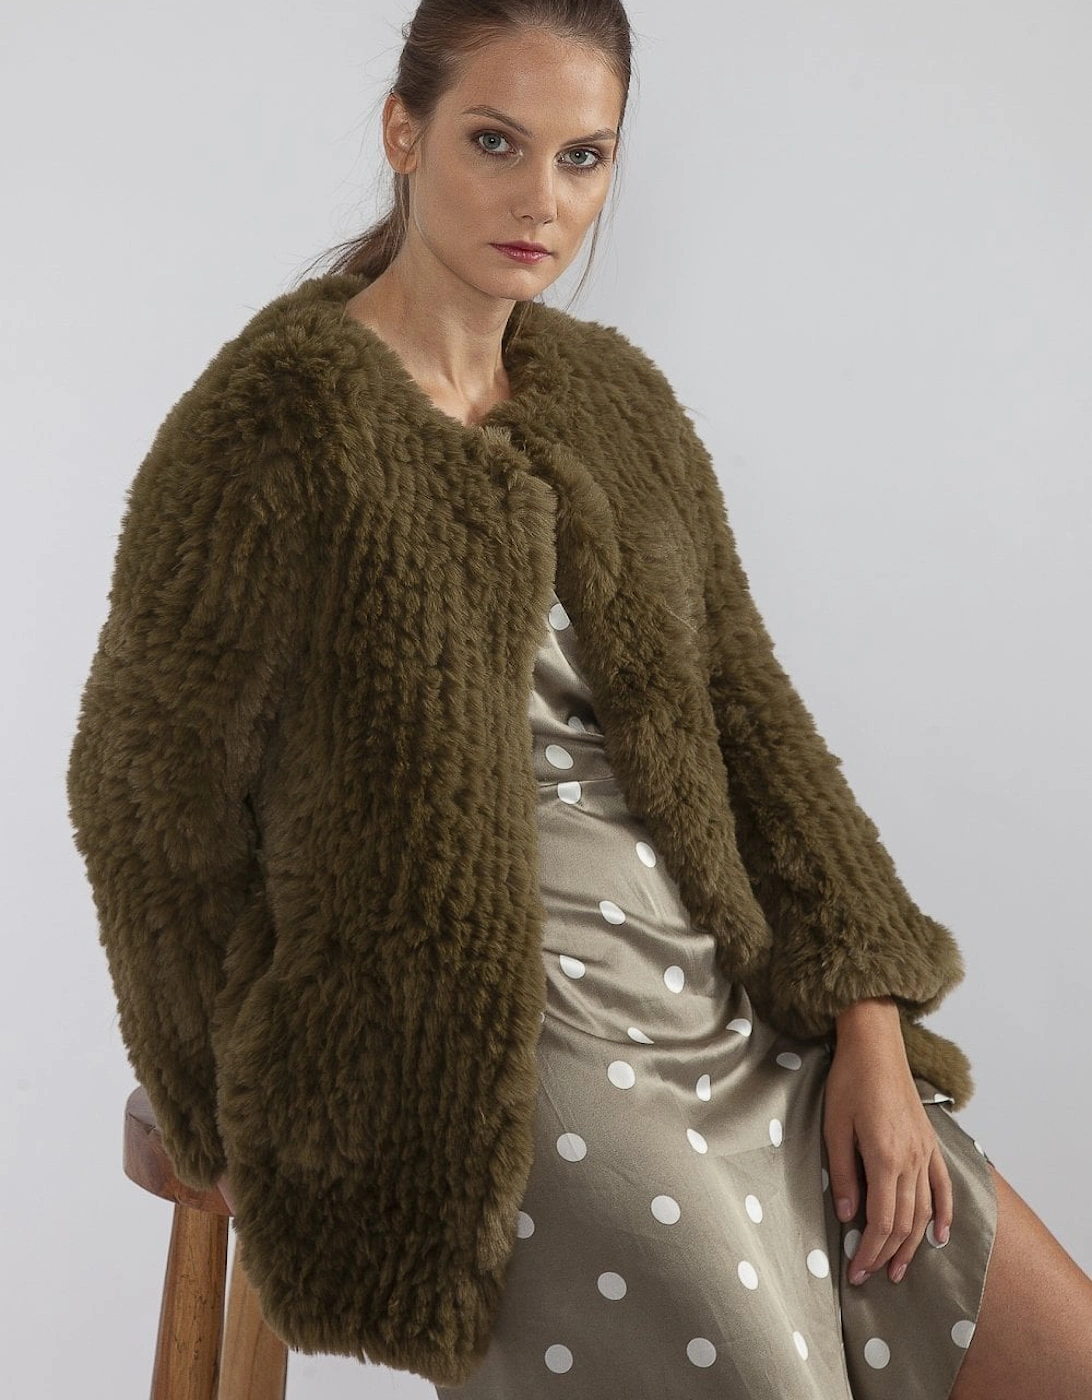 Green Hand Knitted Faux Fur Coat